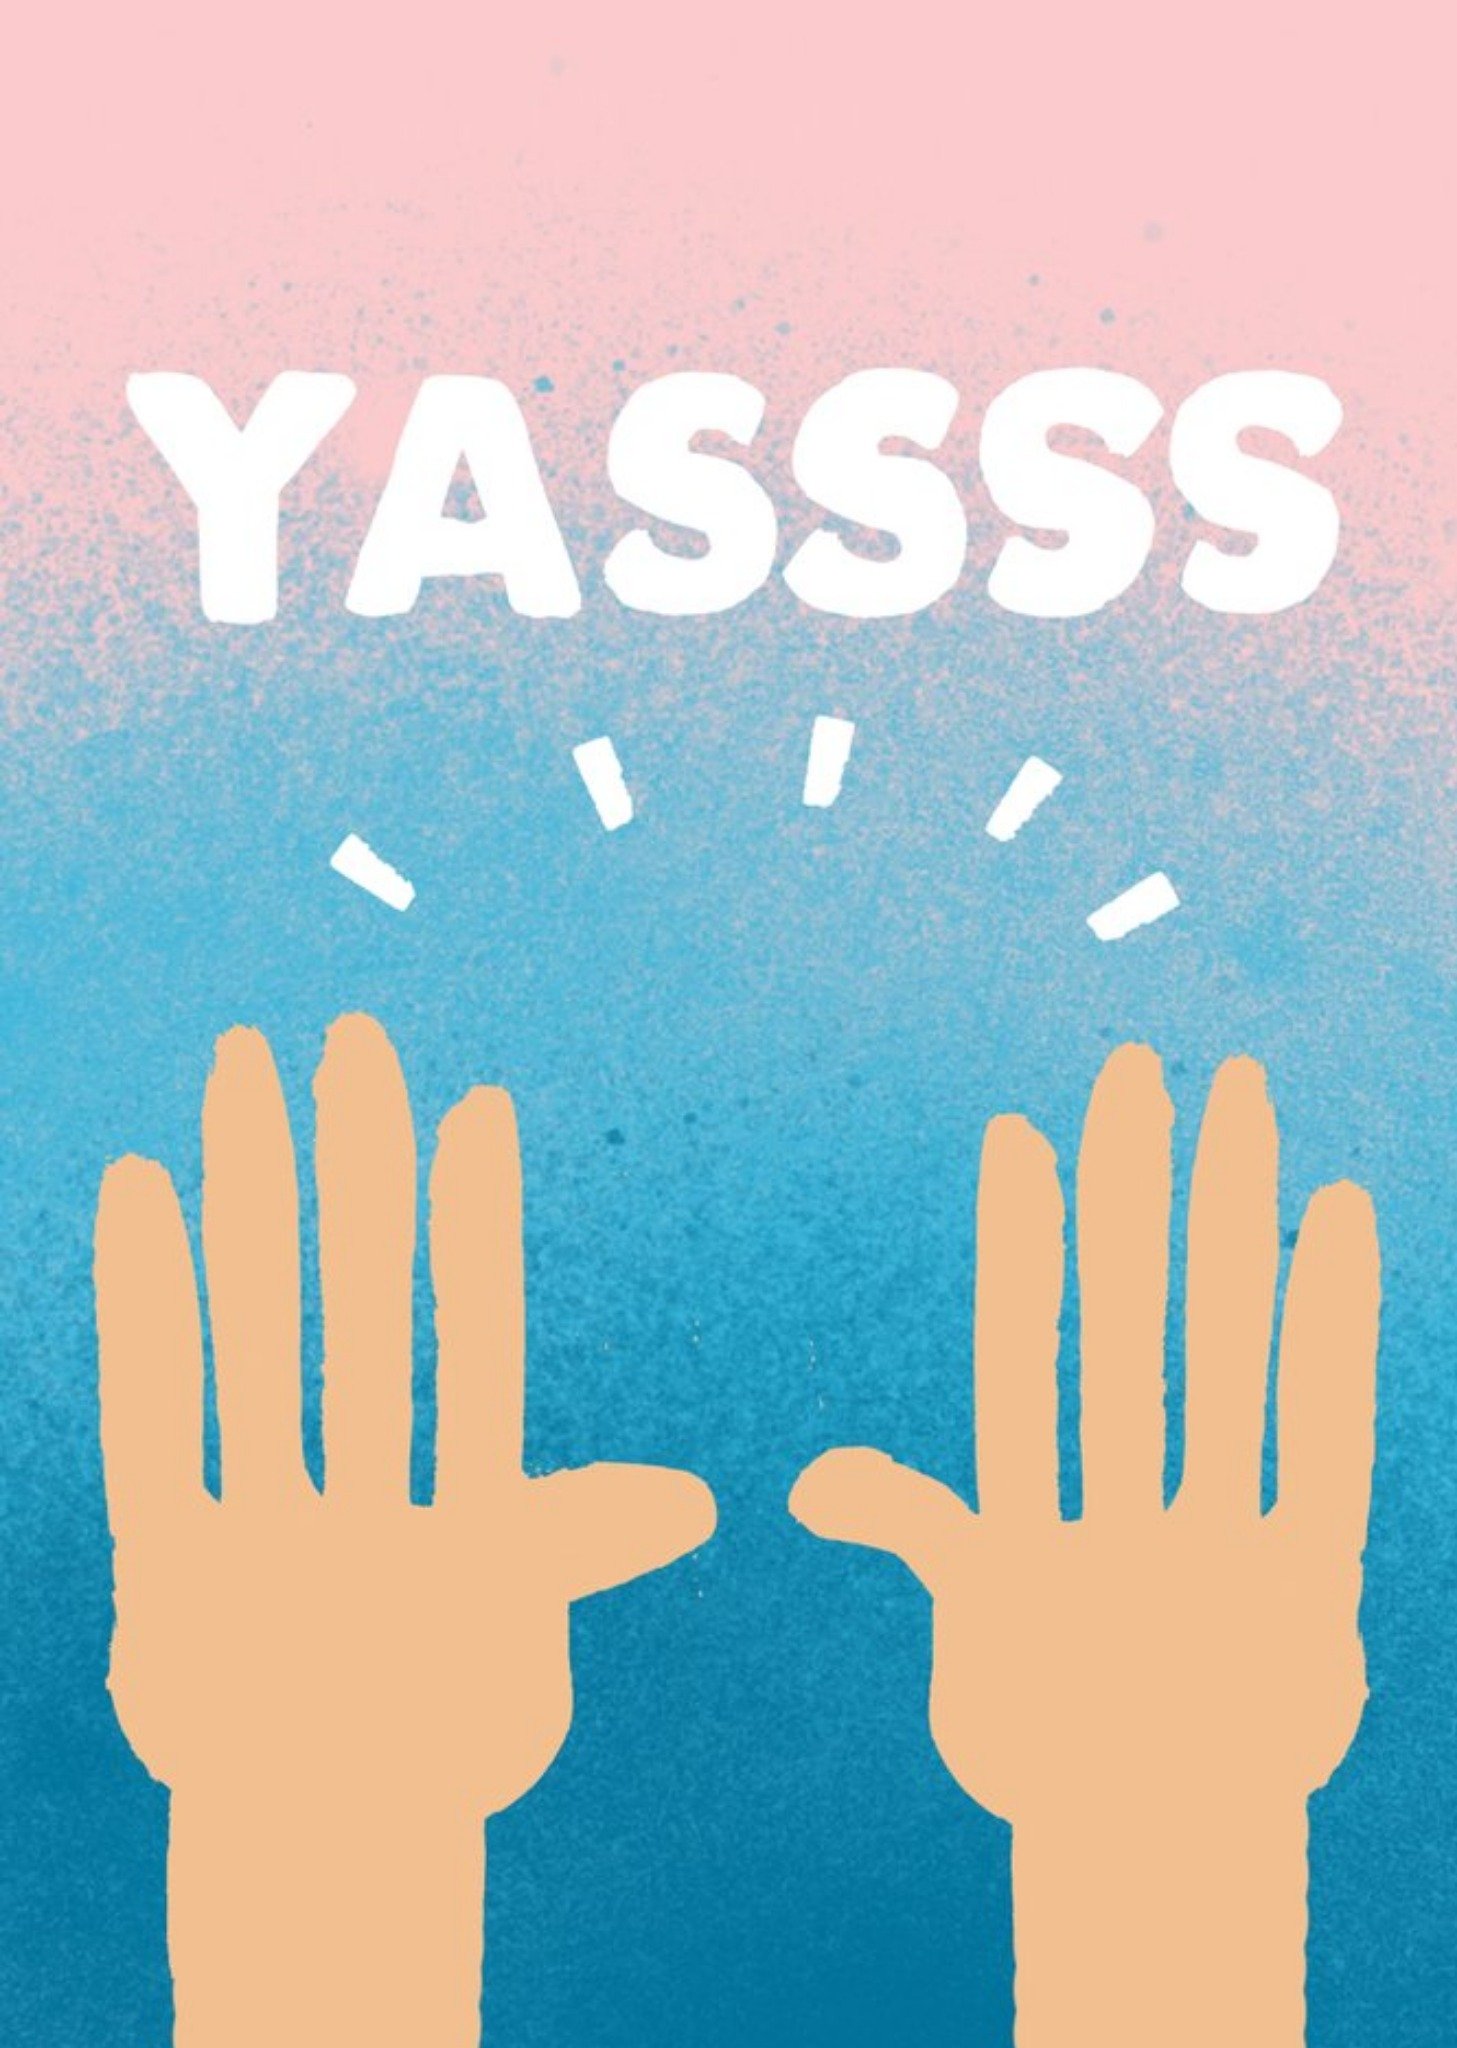 Jolly Awesome Raised Hands Yassss Everyday Card, Large